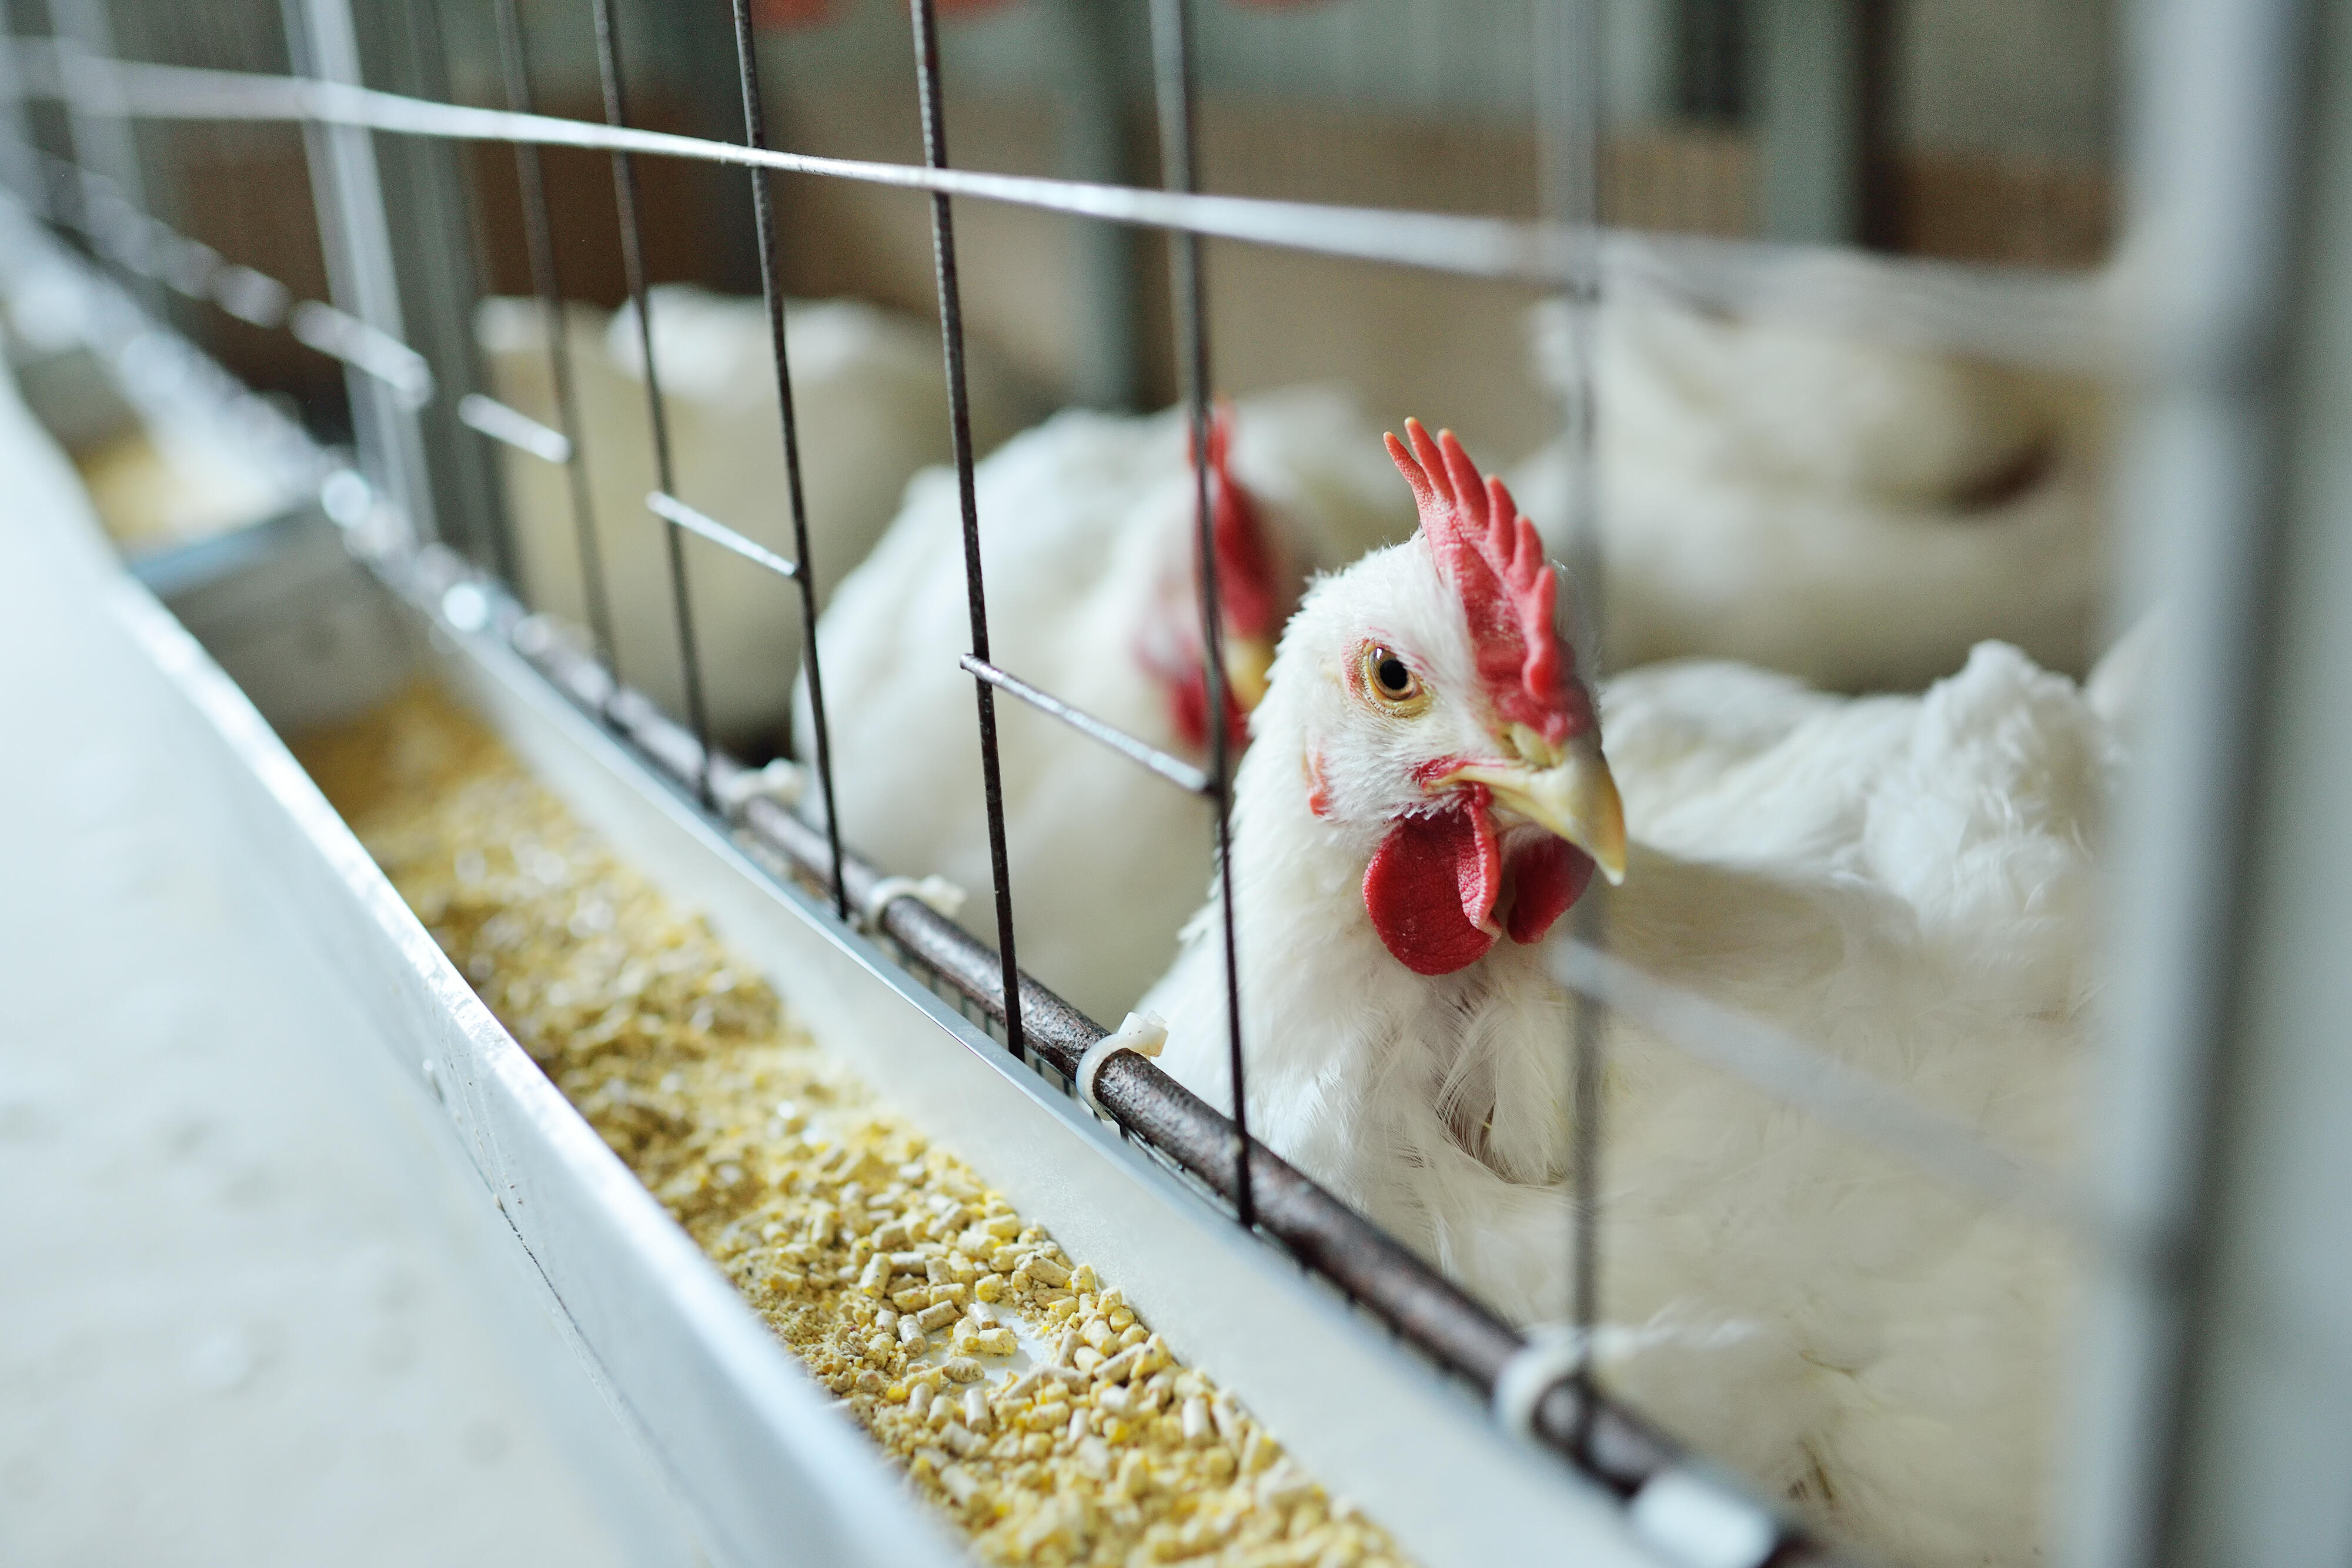 Bird Flu Outbreak Forces Egg Farm To Euthanize 3 Million Chickens iHeart